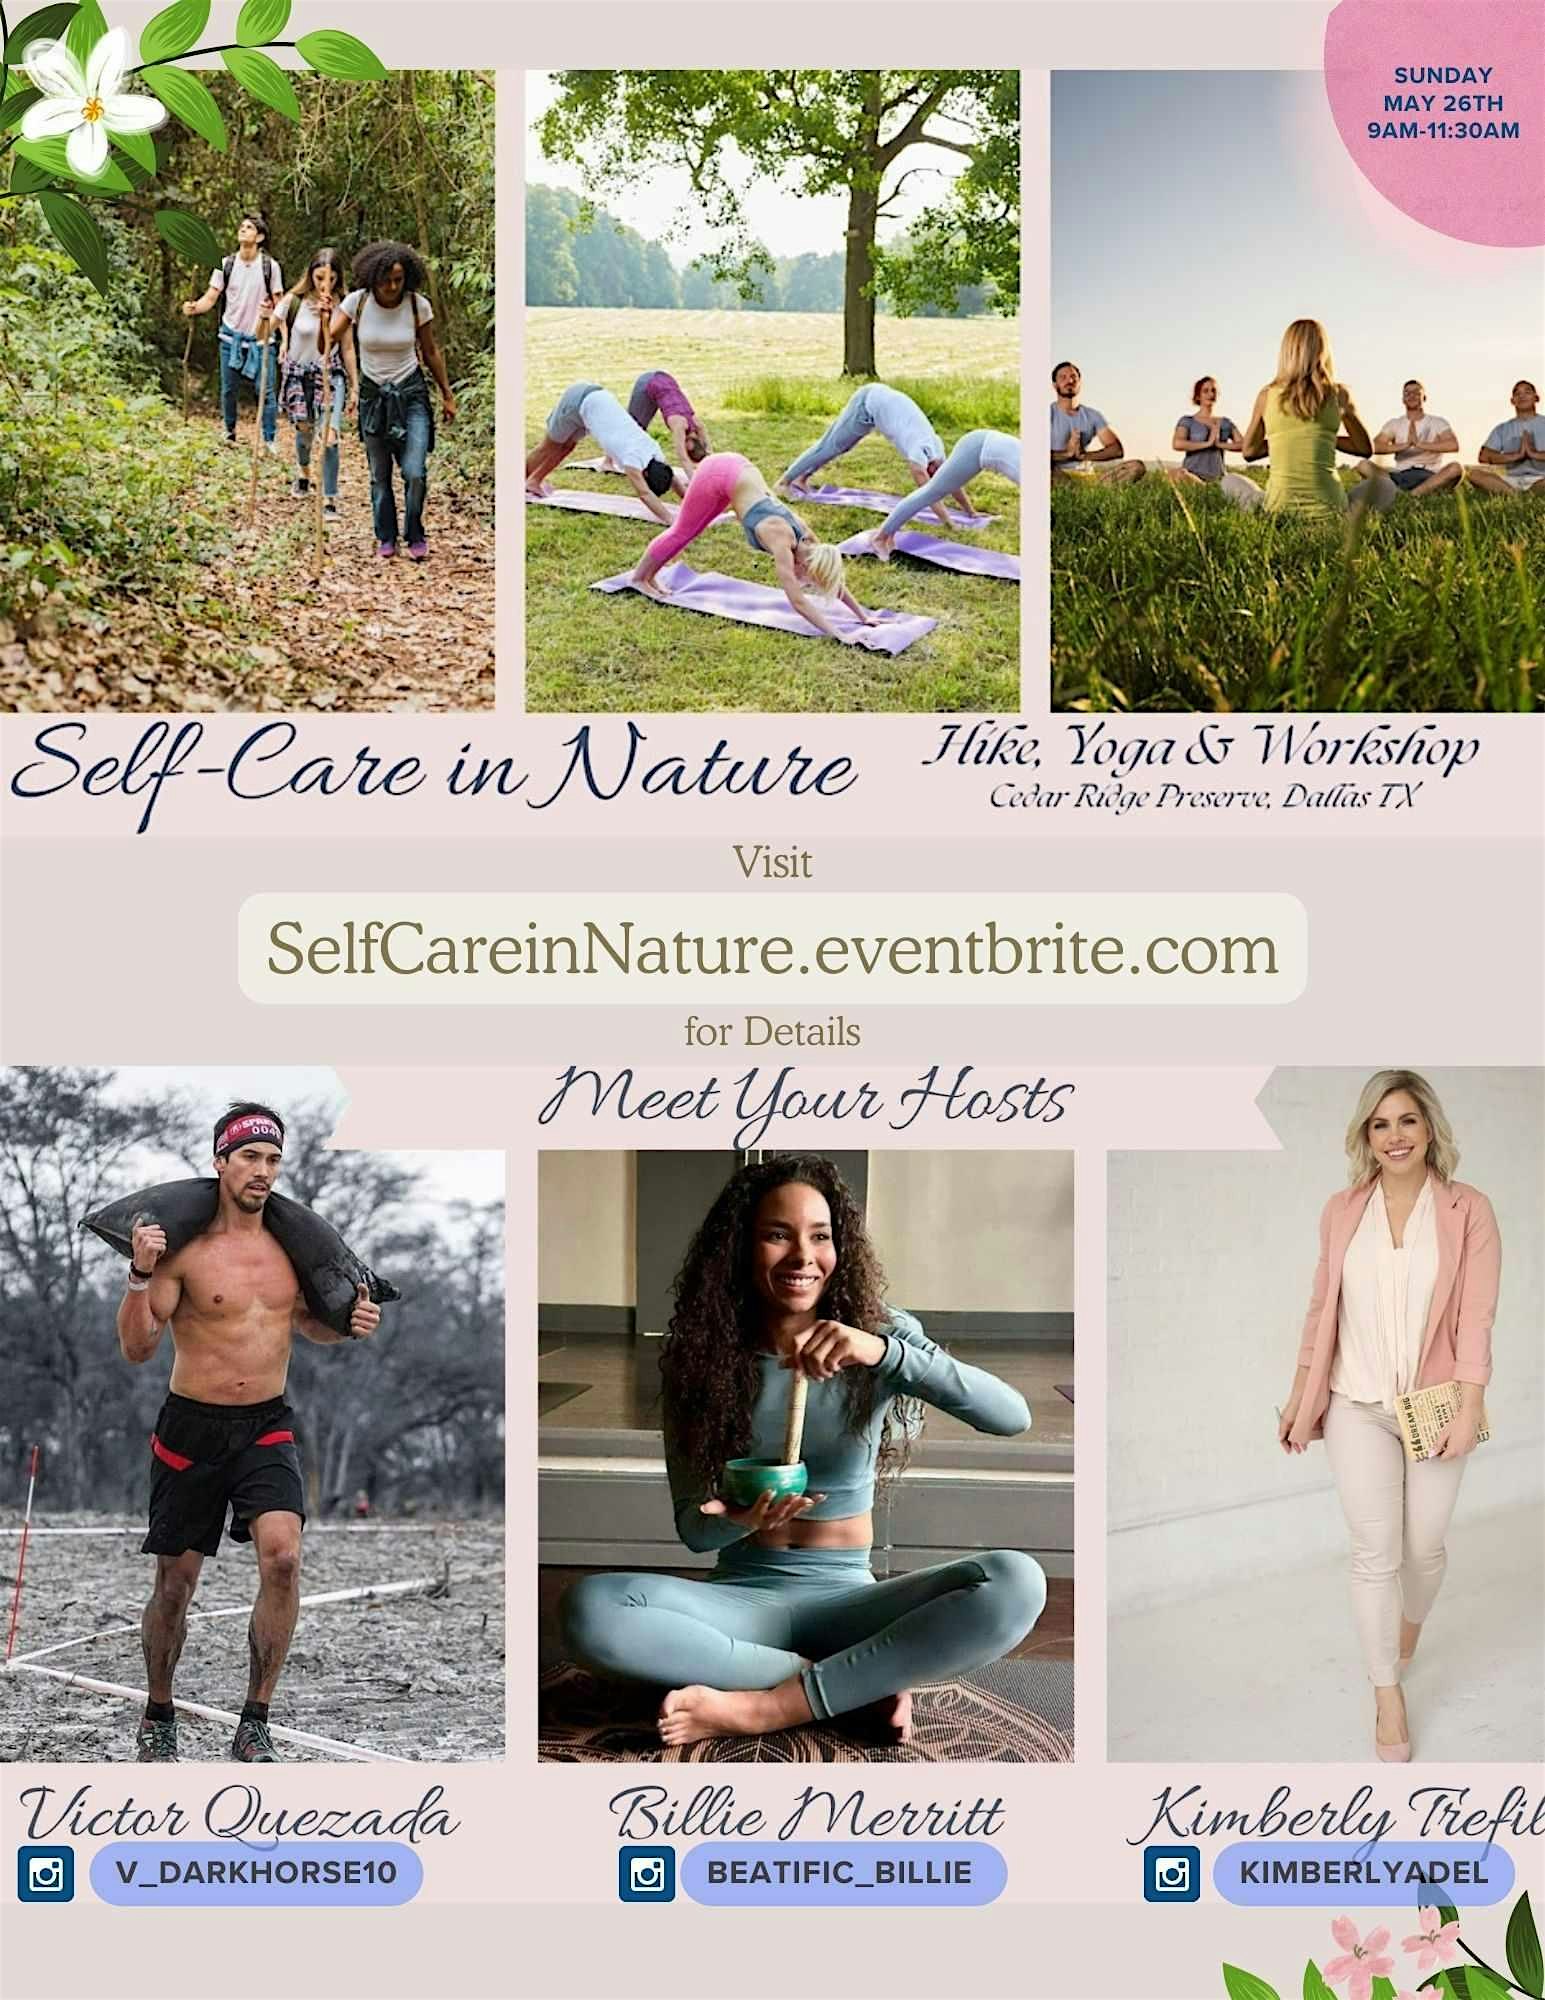 Self-Care Series: Self-Care in Nature with a Hike, Yoga & Workshop